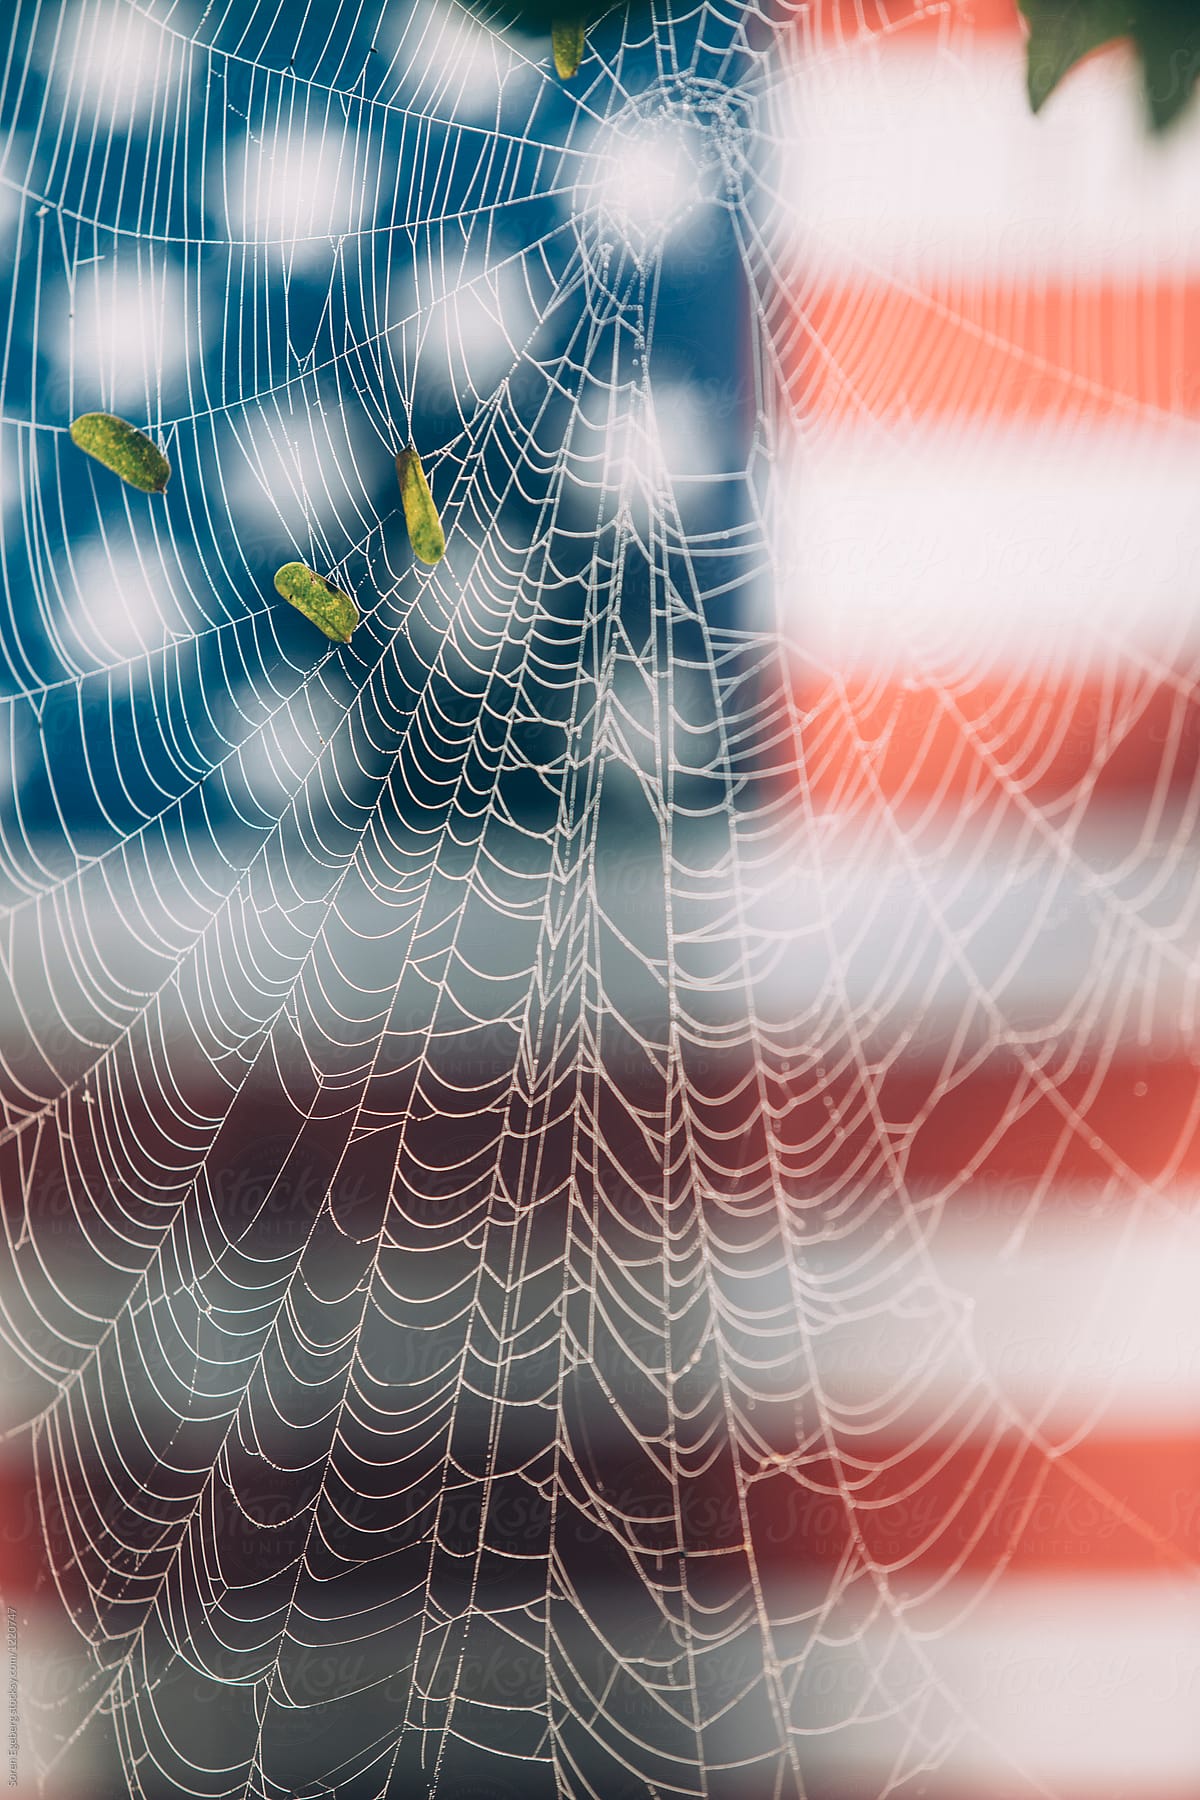 American flag covered by a spider web or cobweb